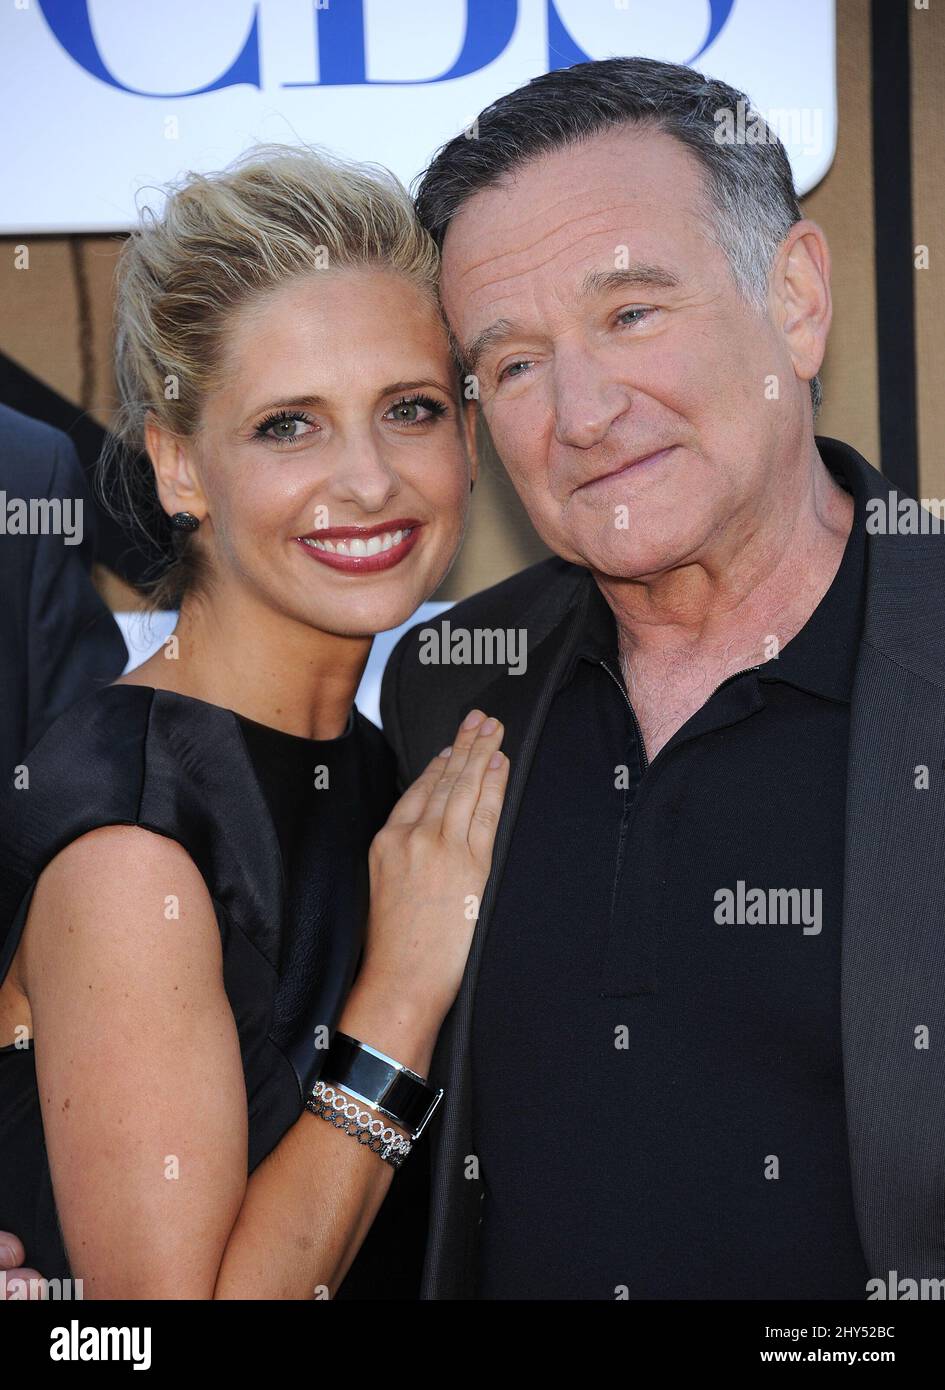 FILE PHOTO: Robin Williams dies age 63. July 29, 2013 Beverly Hills Ca. Sarah Michelle Gellar & Robin Williams CBS, Showtime and The CW 2013 Annual Summer Stars Party at Hilton Hotel Chase Rollins / AFF-USA.COM Stock Photo